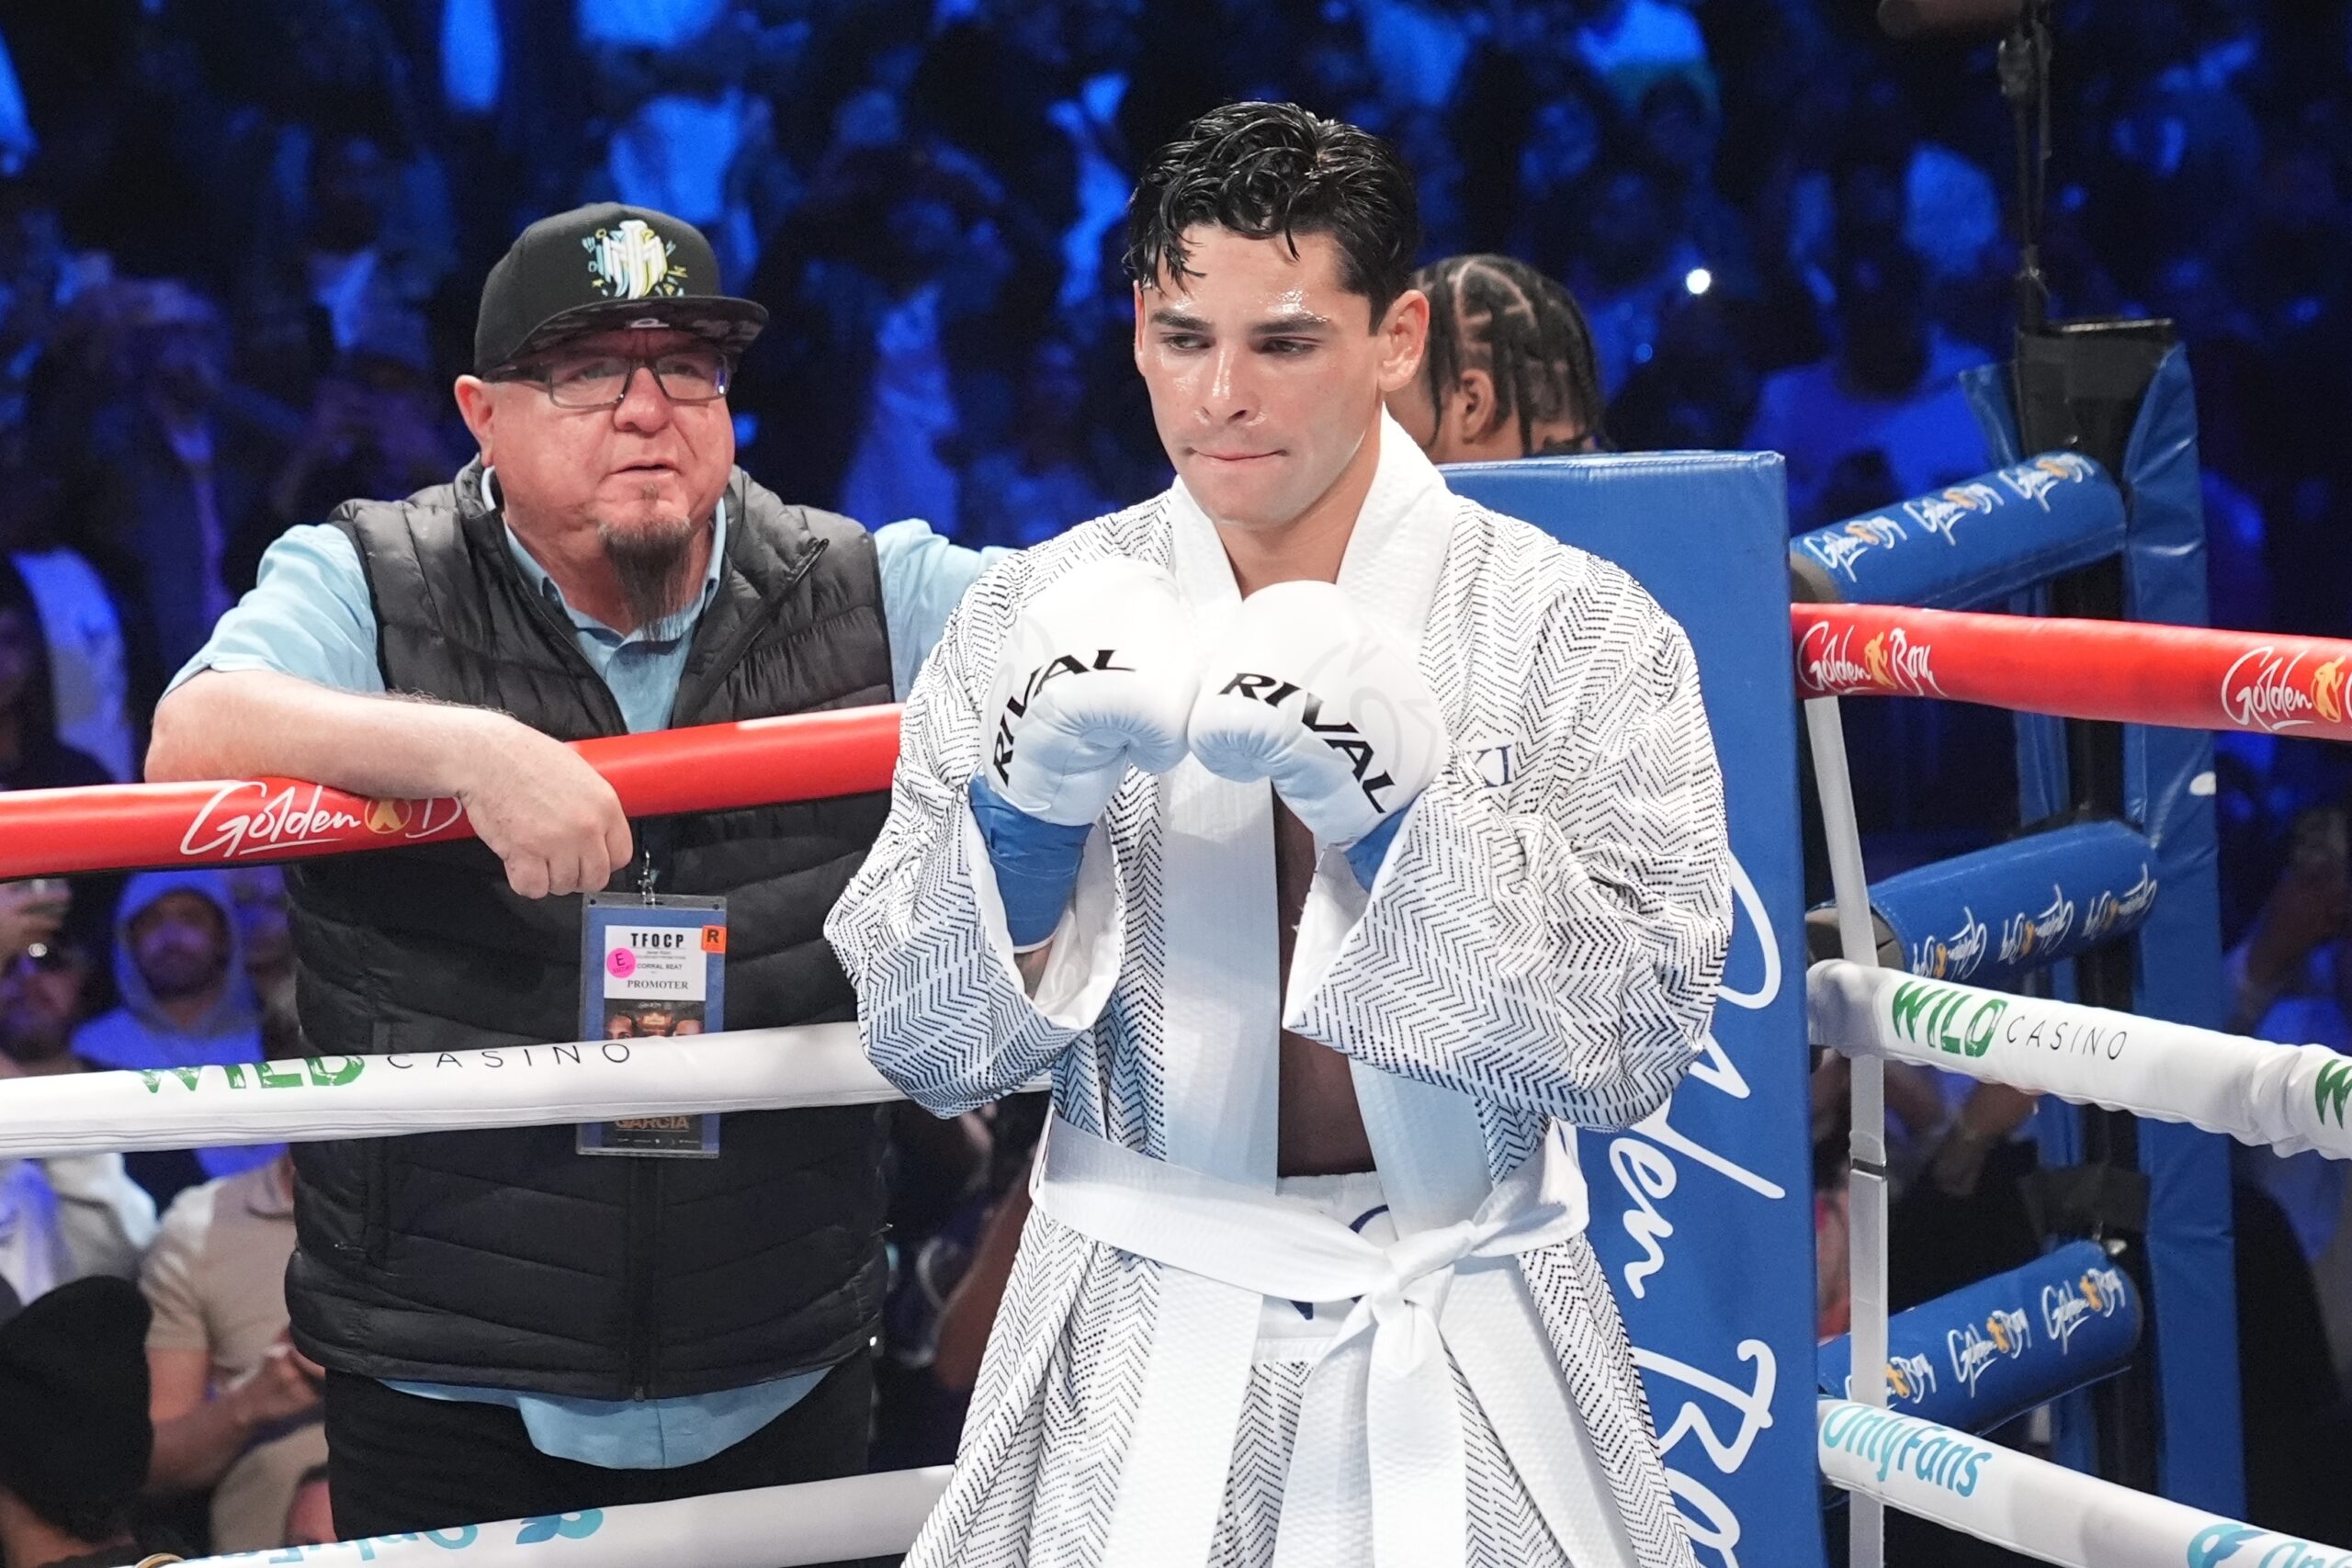 ryan-garcia-reveals-he-bet-on-himself-against-devin-haney-and-won-$12-million